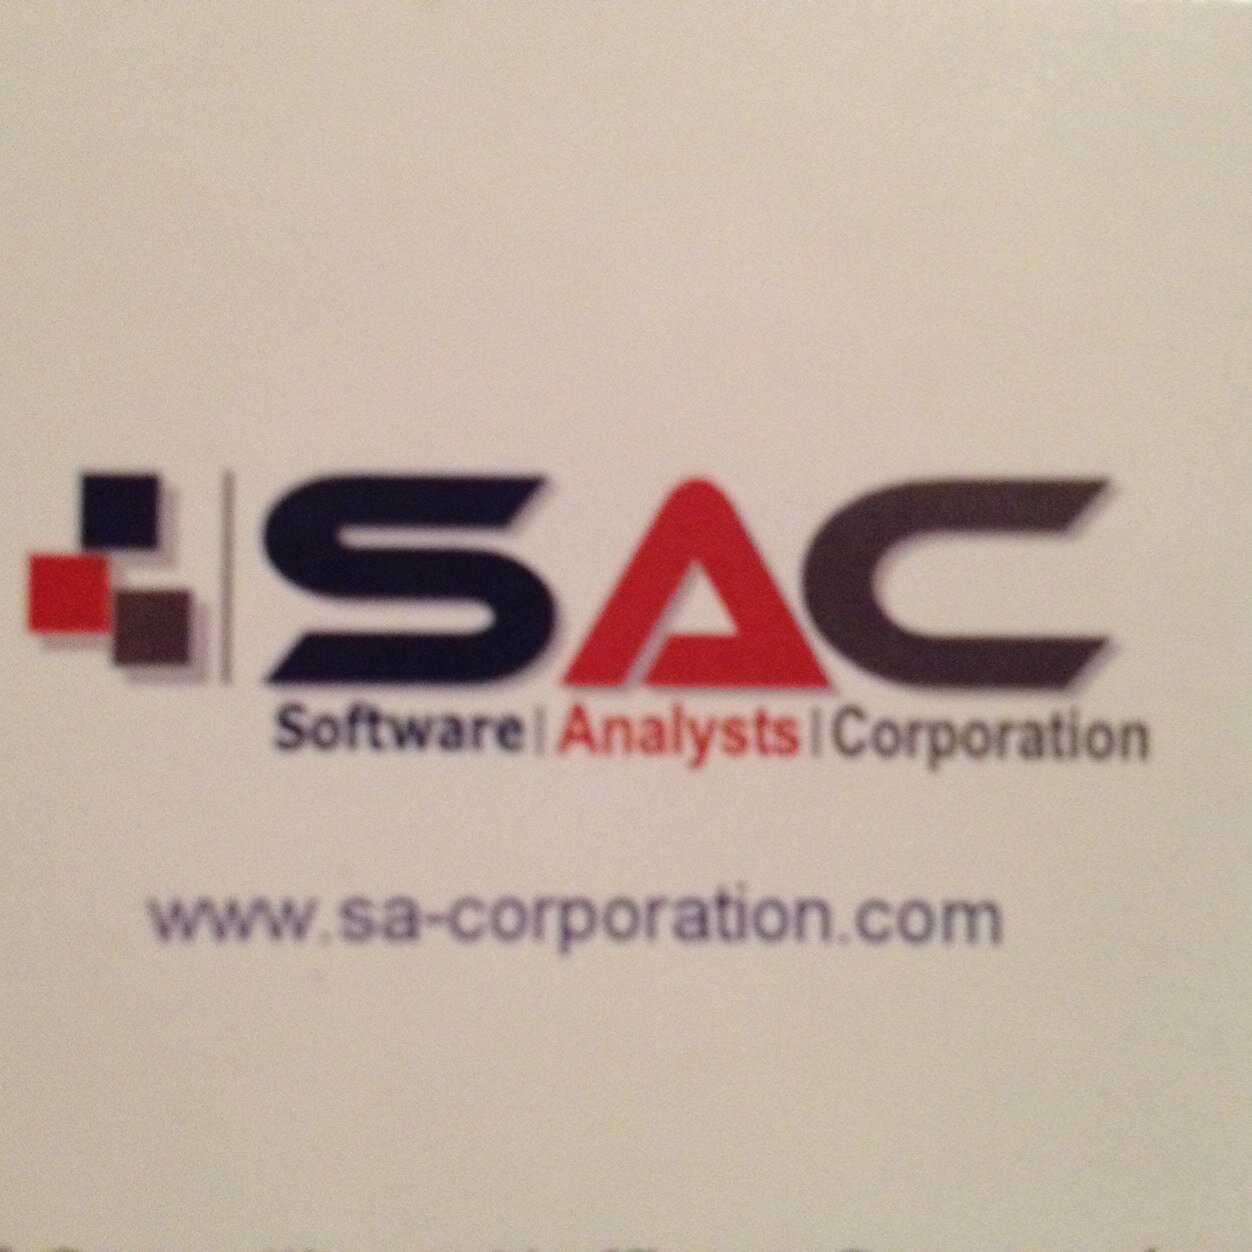 Software Analysts Corporation (SAC) is a leading provider of Enterprise IT Solutions. Bringing the right people to the right clients at the right time.